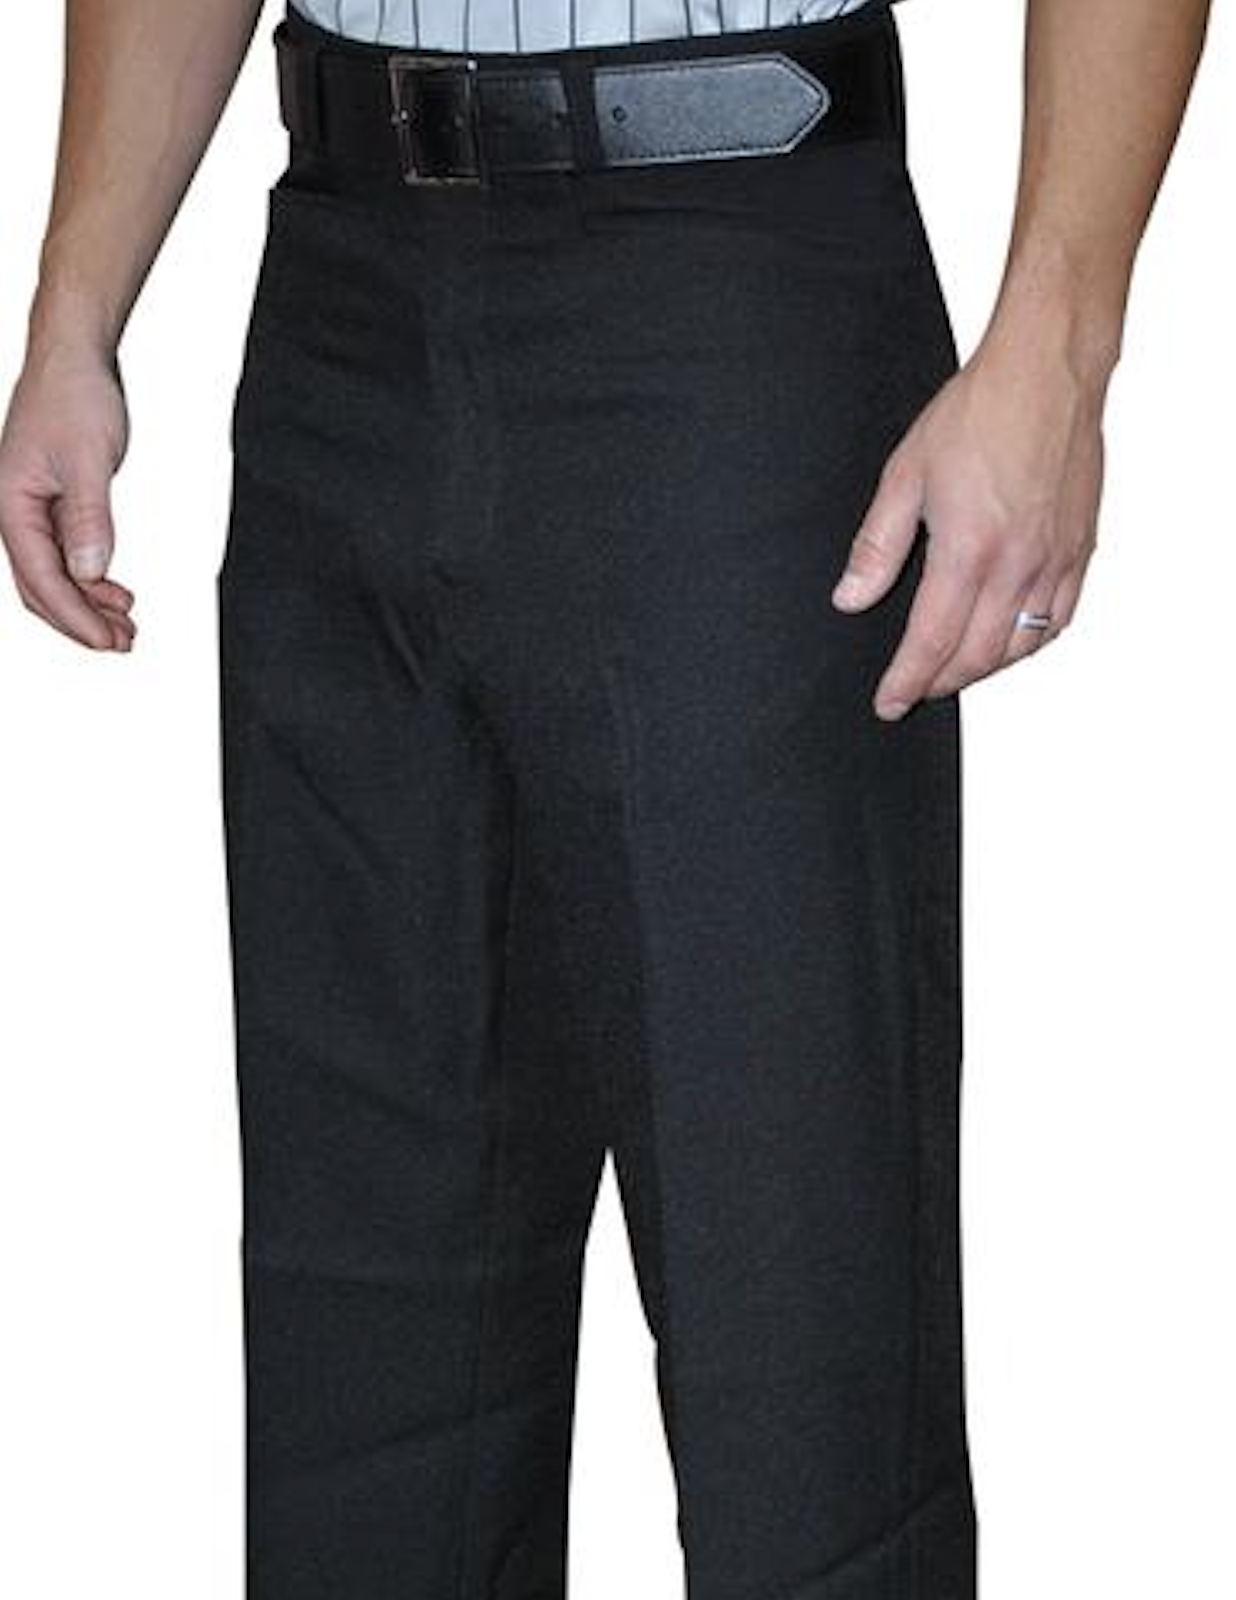 Primary image for SMITTY | BKS-275 | Black Polyester Flat Front Official's Pants with BELT LOOPS